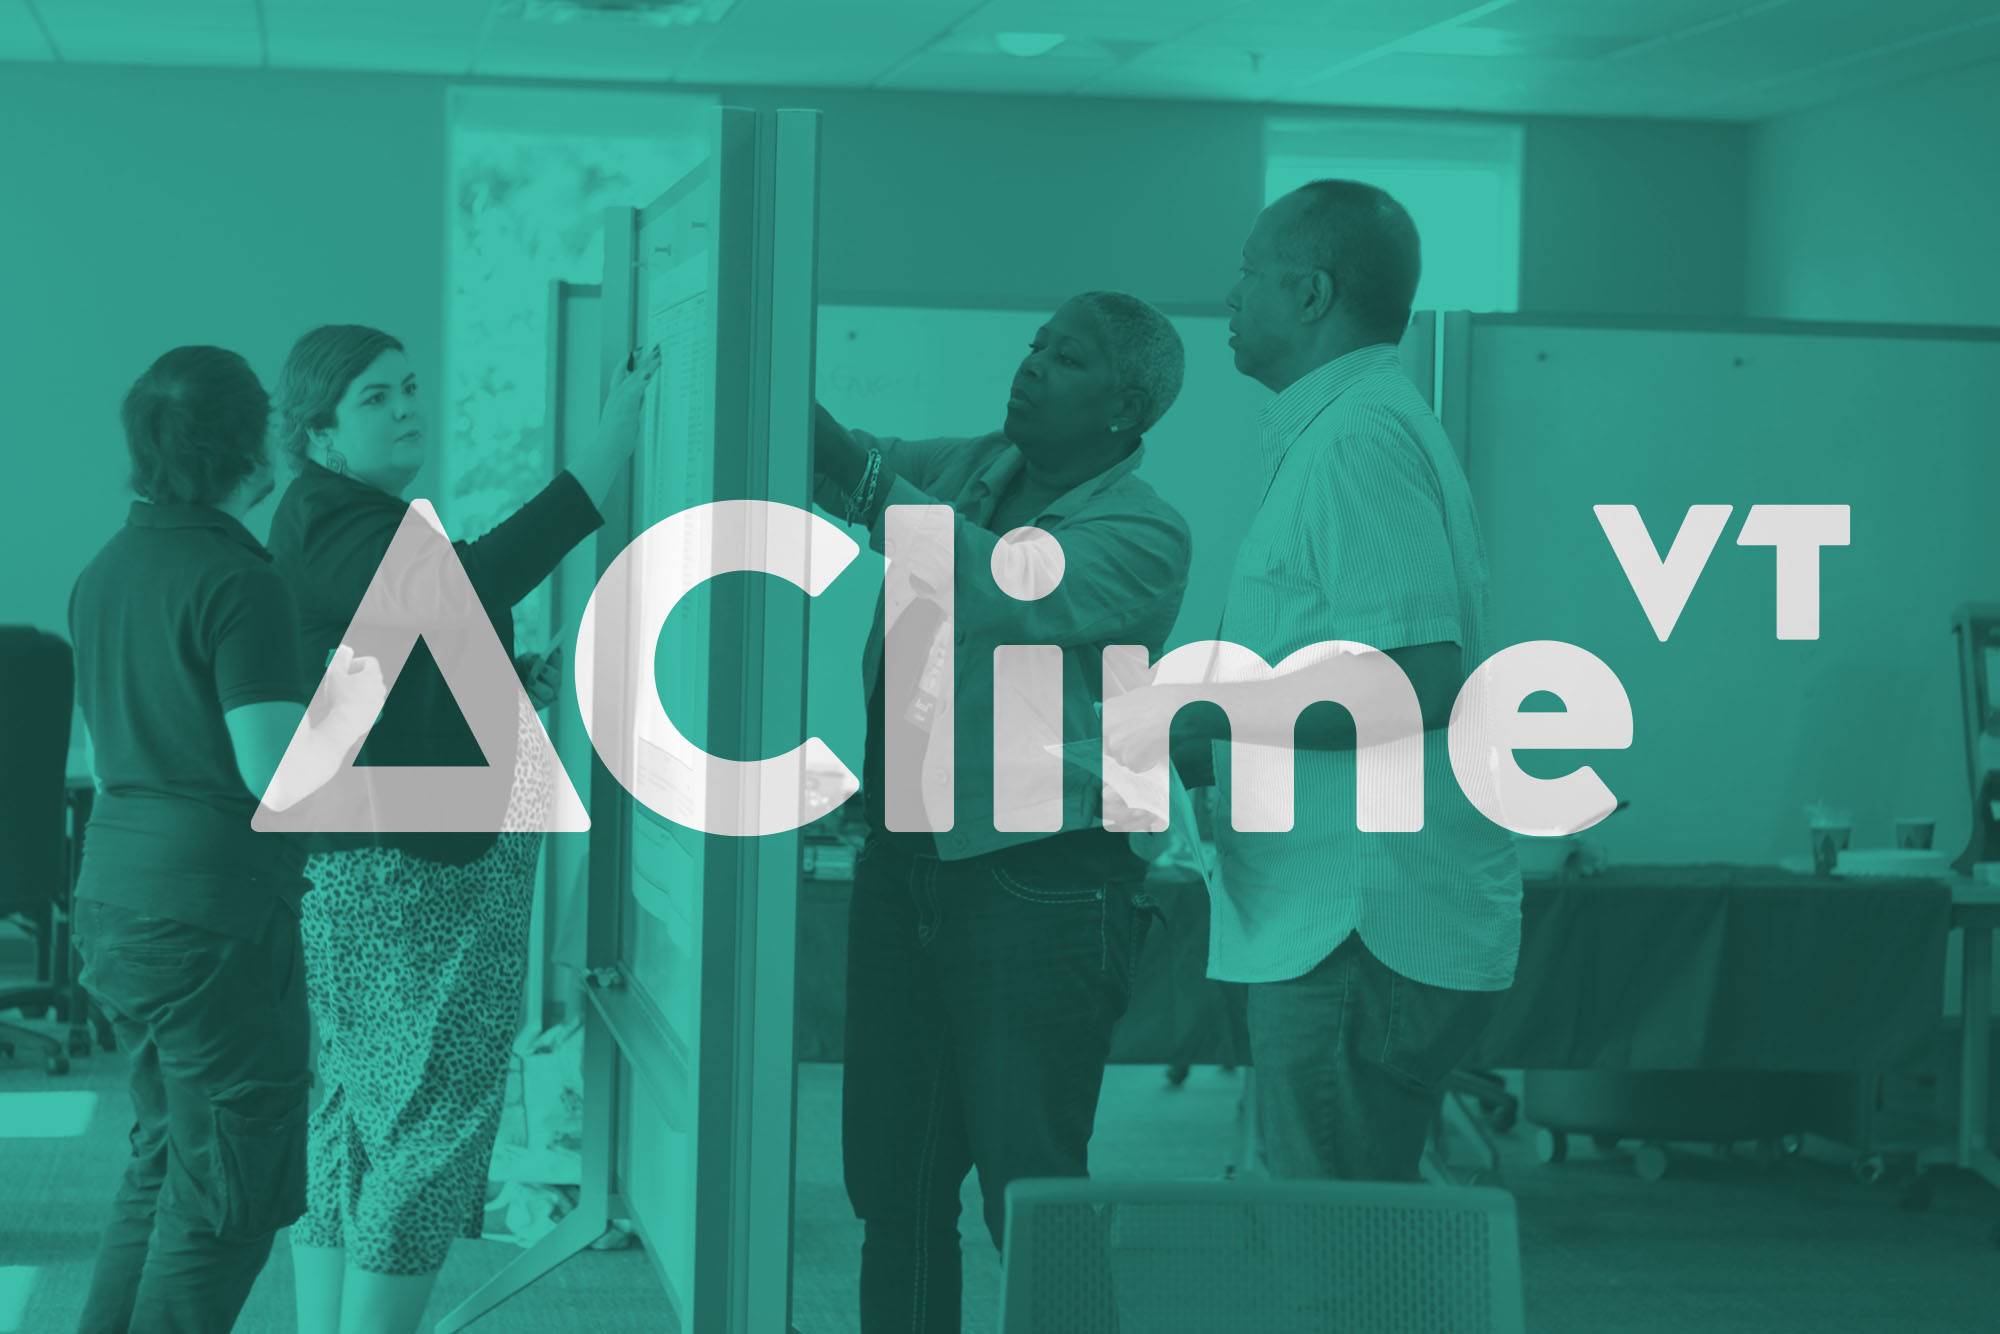 DeltaClimeVT, a Vermont-based business accelerator